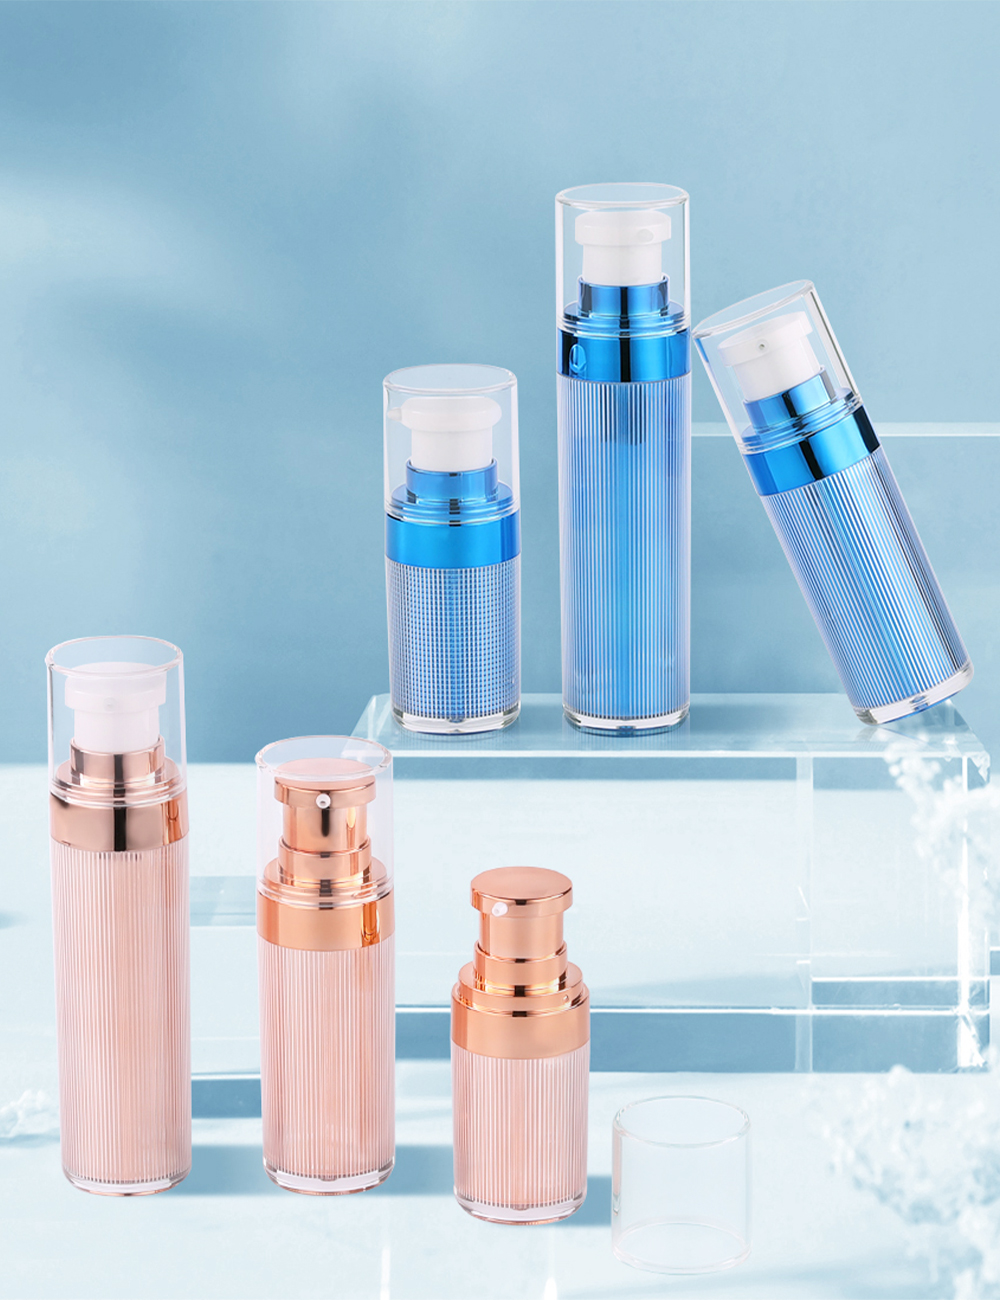 What features does the airless bottle offer for precise product dispensing?